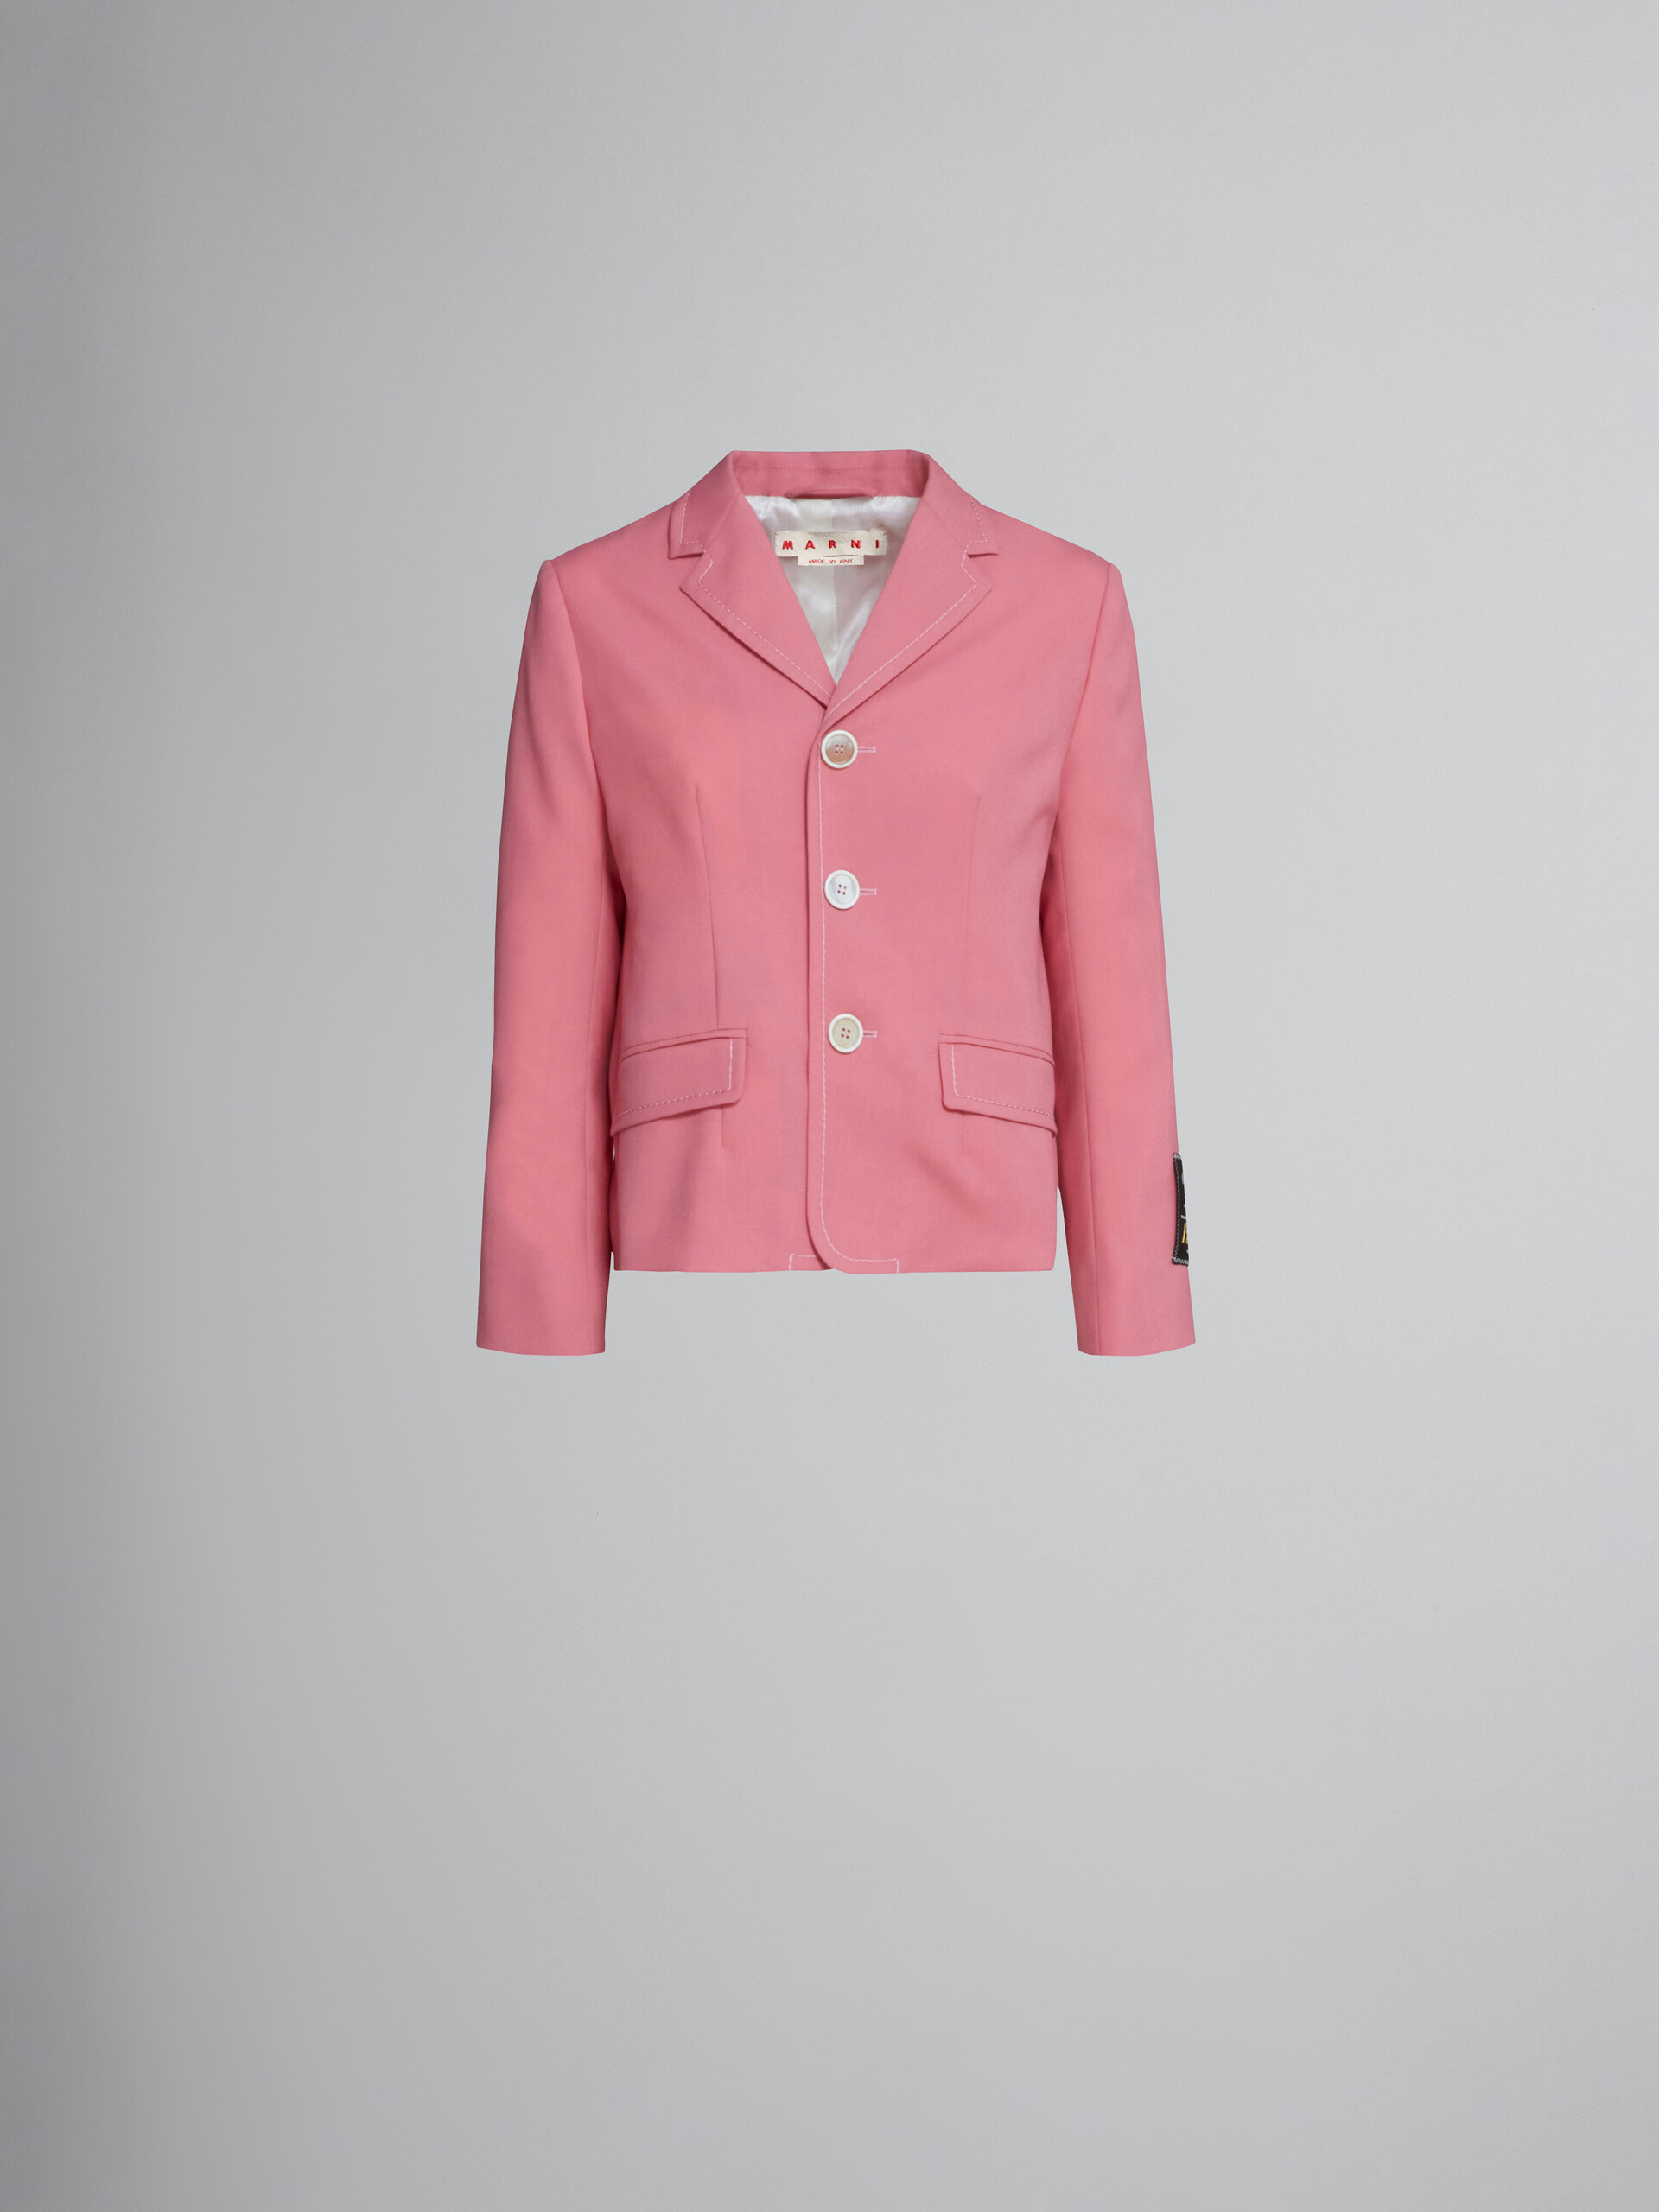 Baby pink baby jacket in tropical wool - Jackets - Image 1